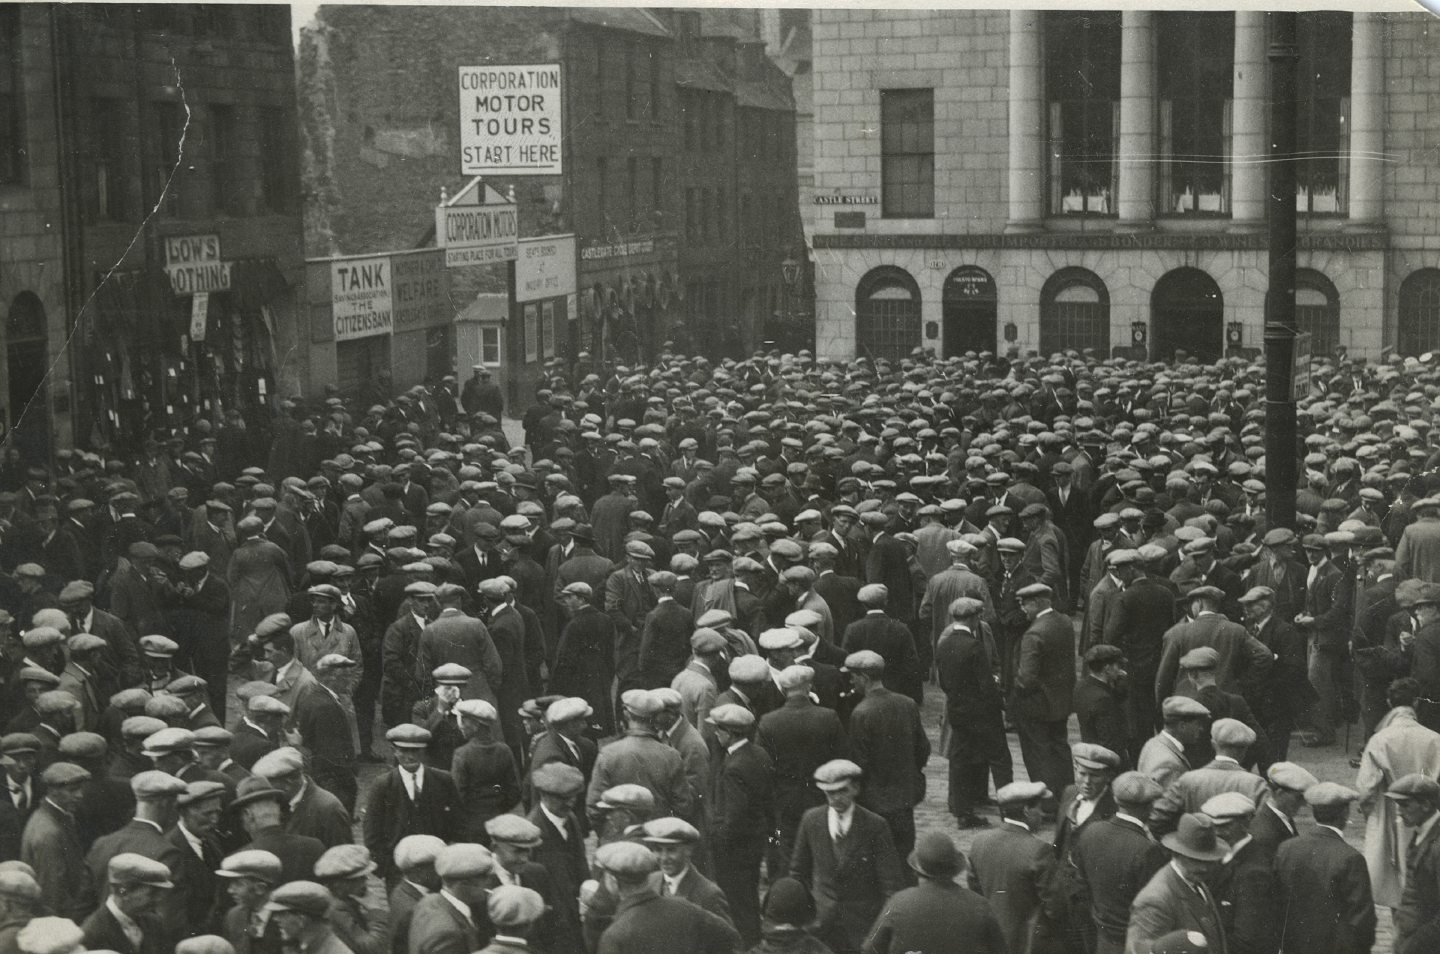 1962: Muckle Friday on March 8 at the Castlegate in Aberdeen where farmers hired workers for the coming season on this ancient market day.